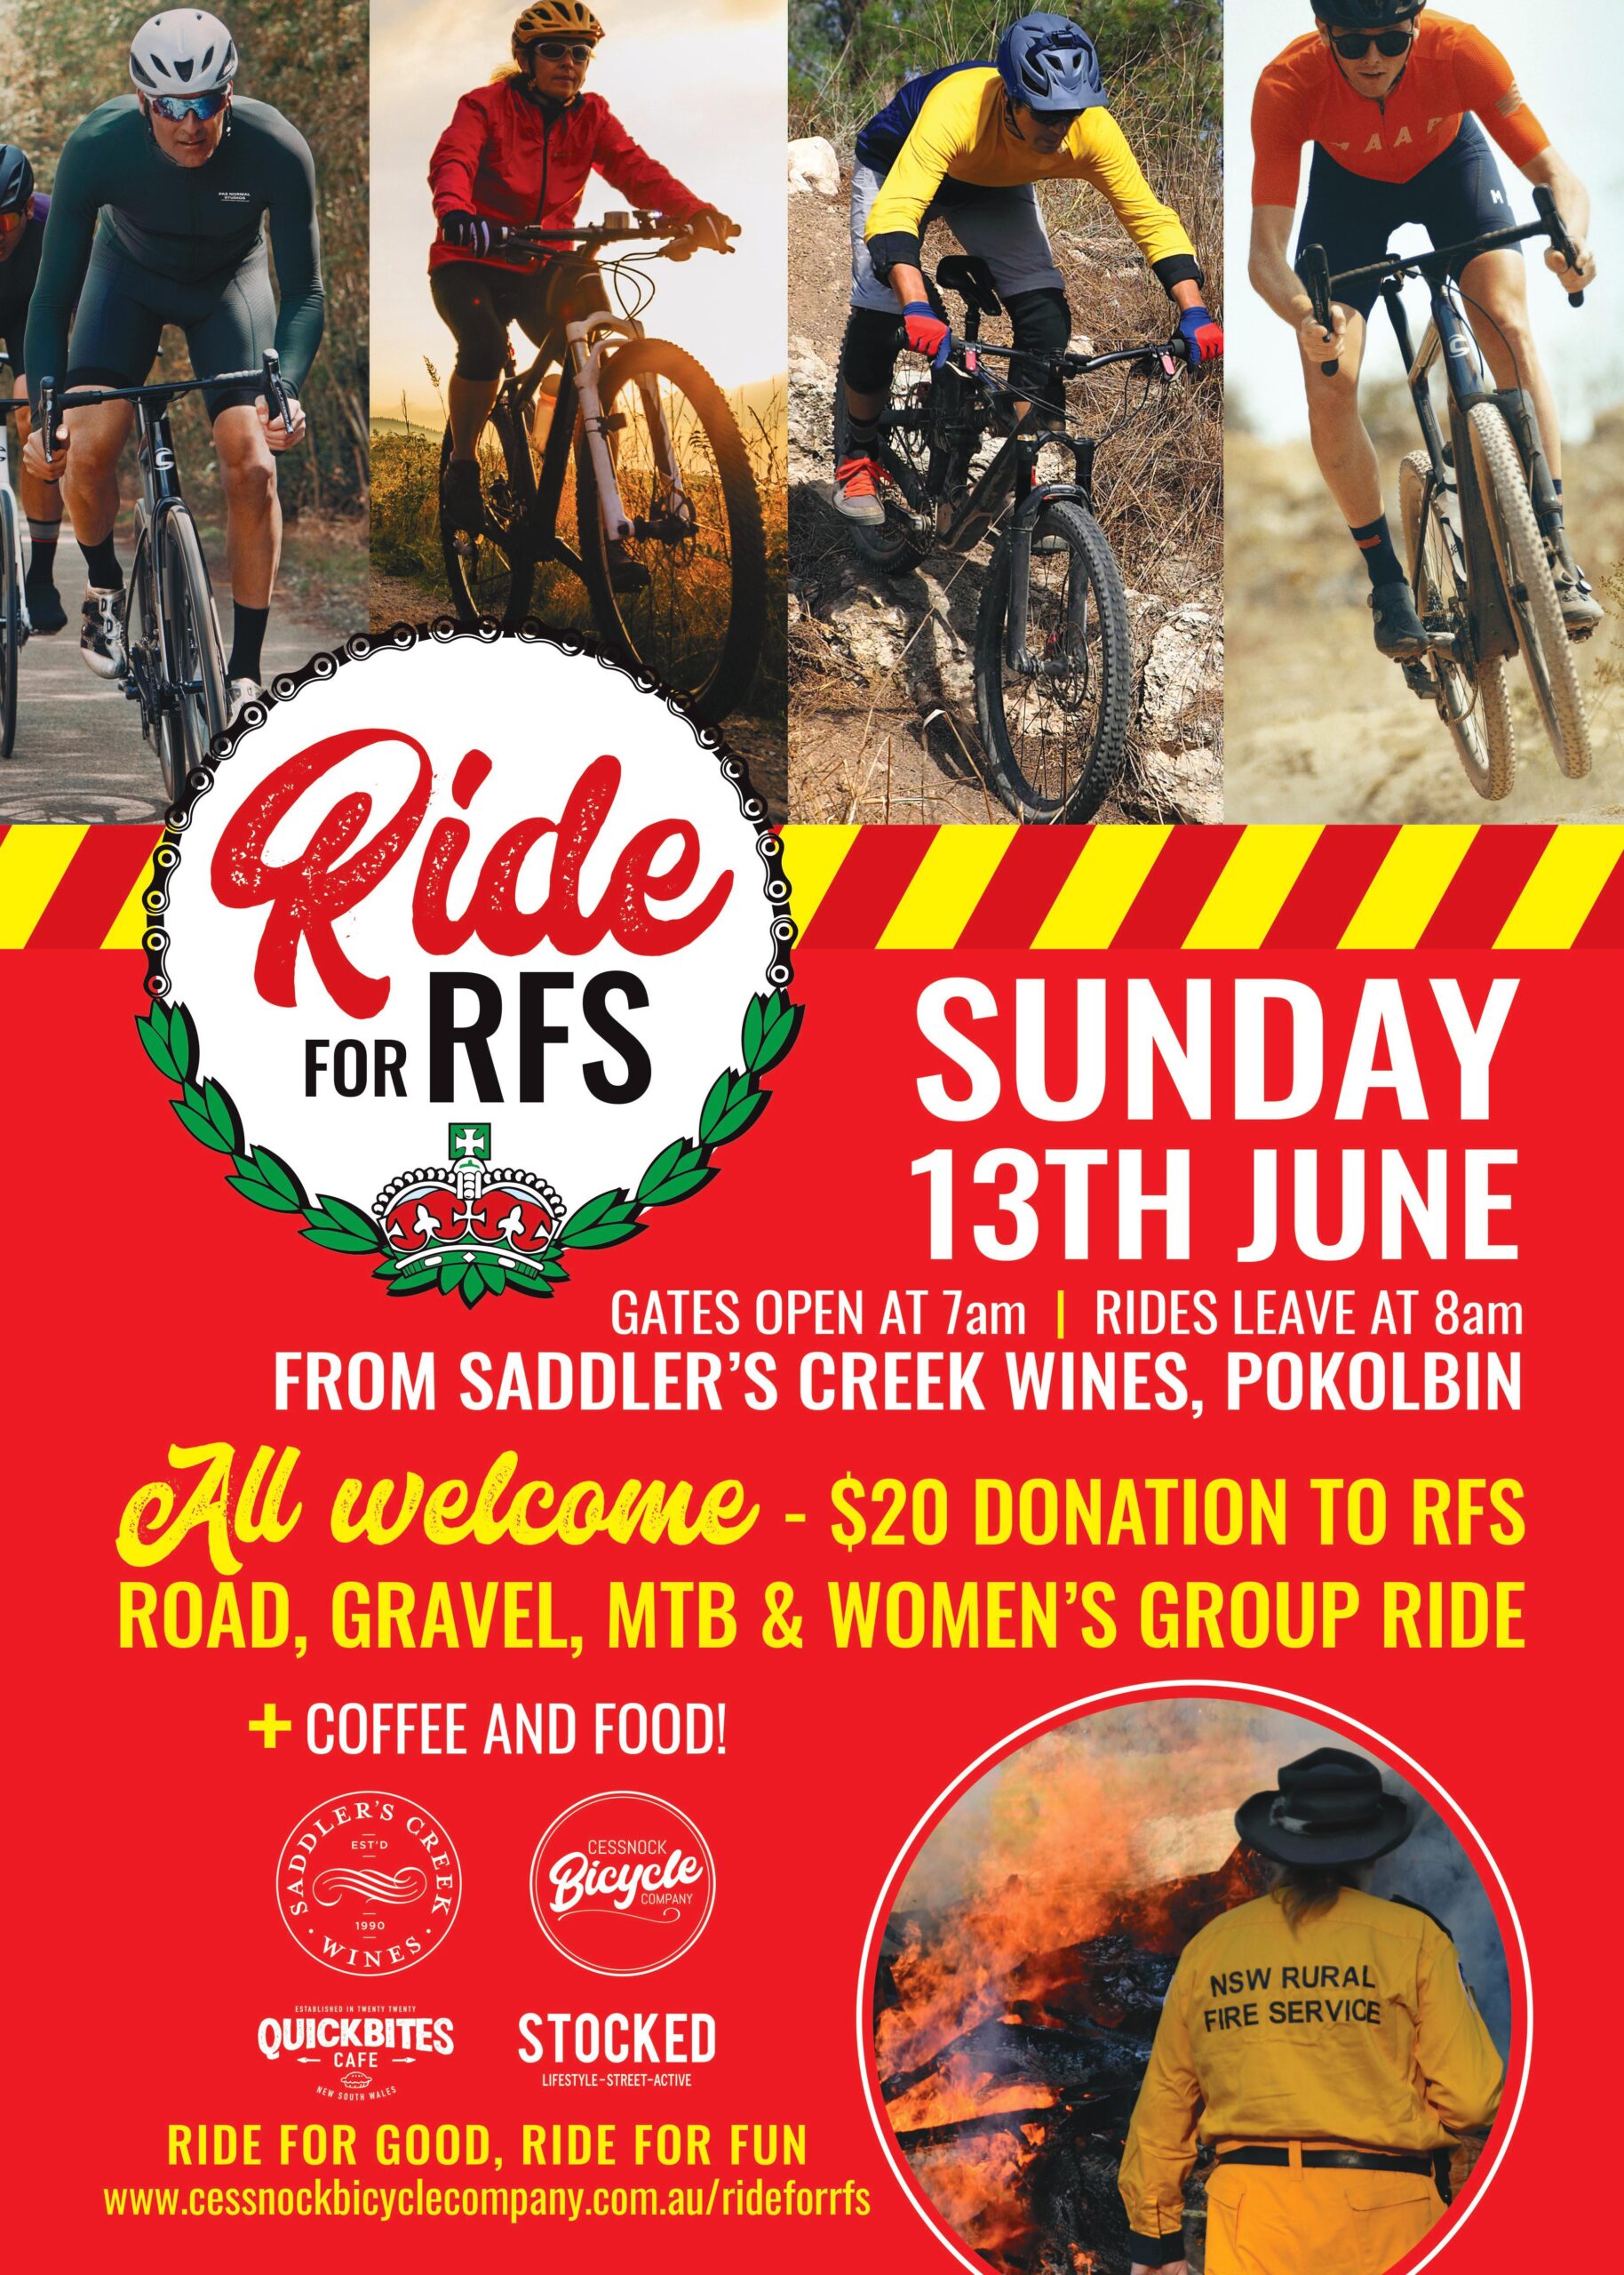 Cessnock Bicycle Company invites you to Ride for RFS